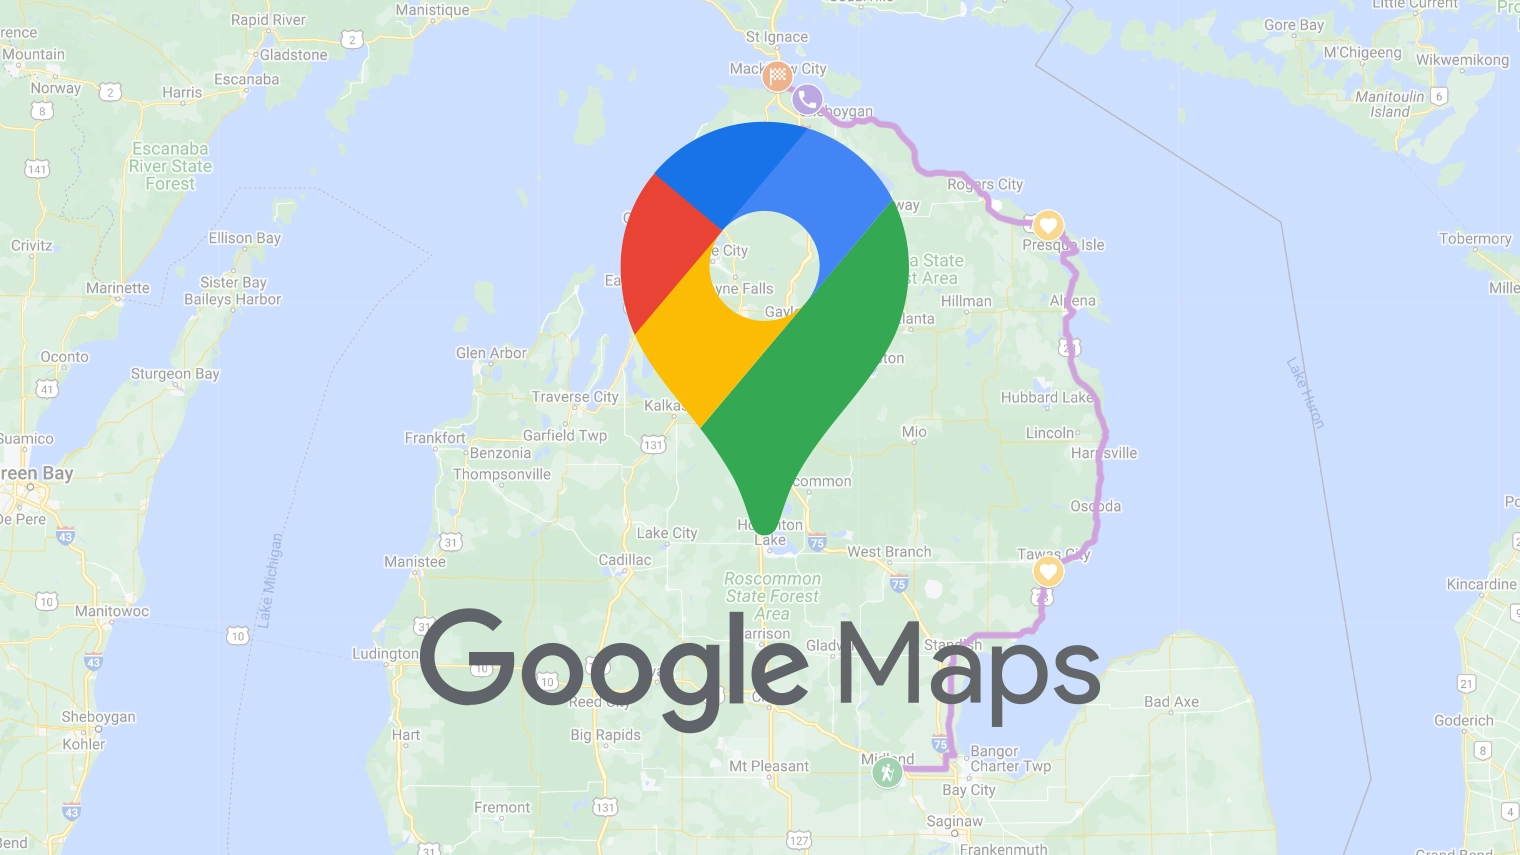 Course map with Google Maps logo